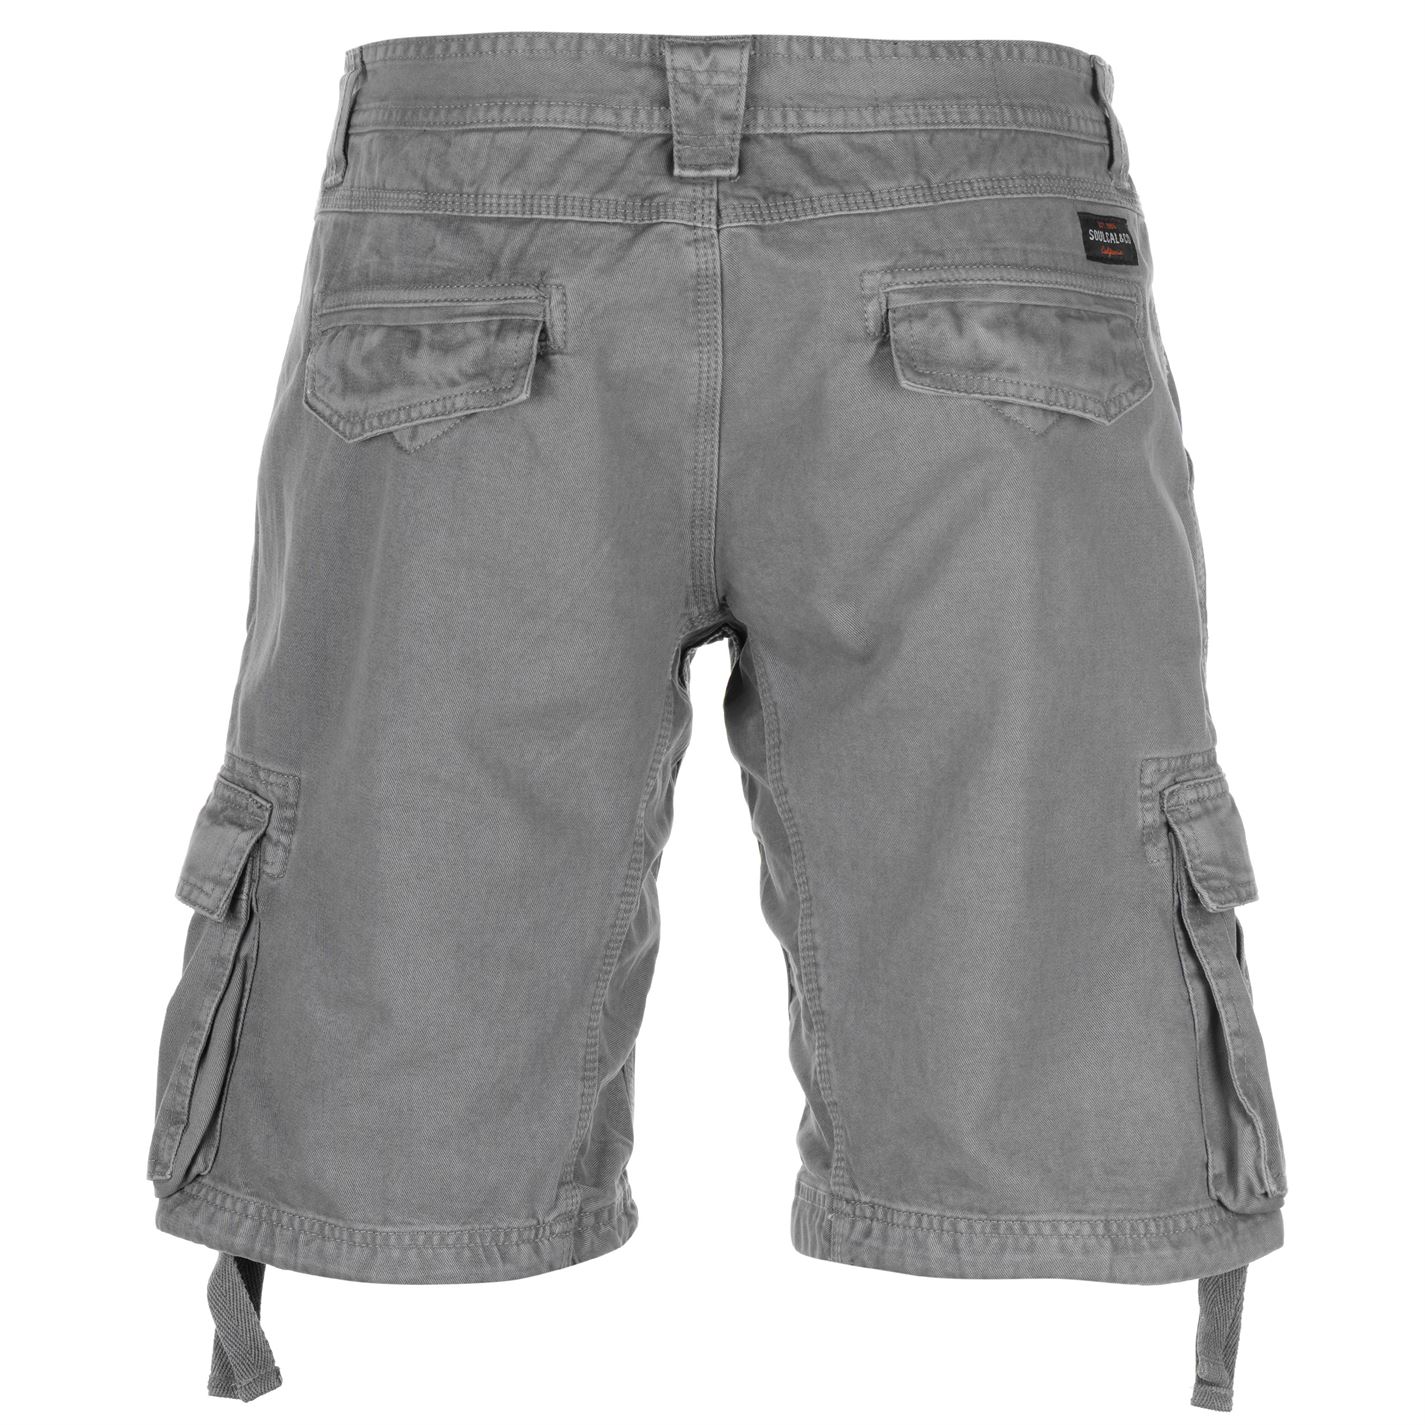 SoulCal Utility Shorts Mens Gents Cargo Pants Trousers Bottoms | eBay